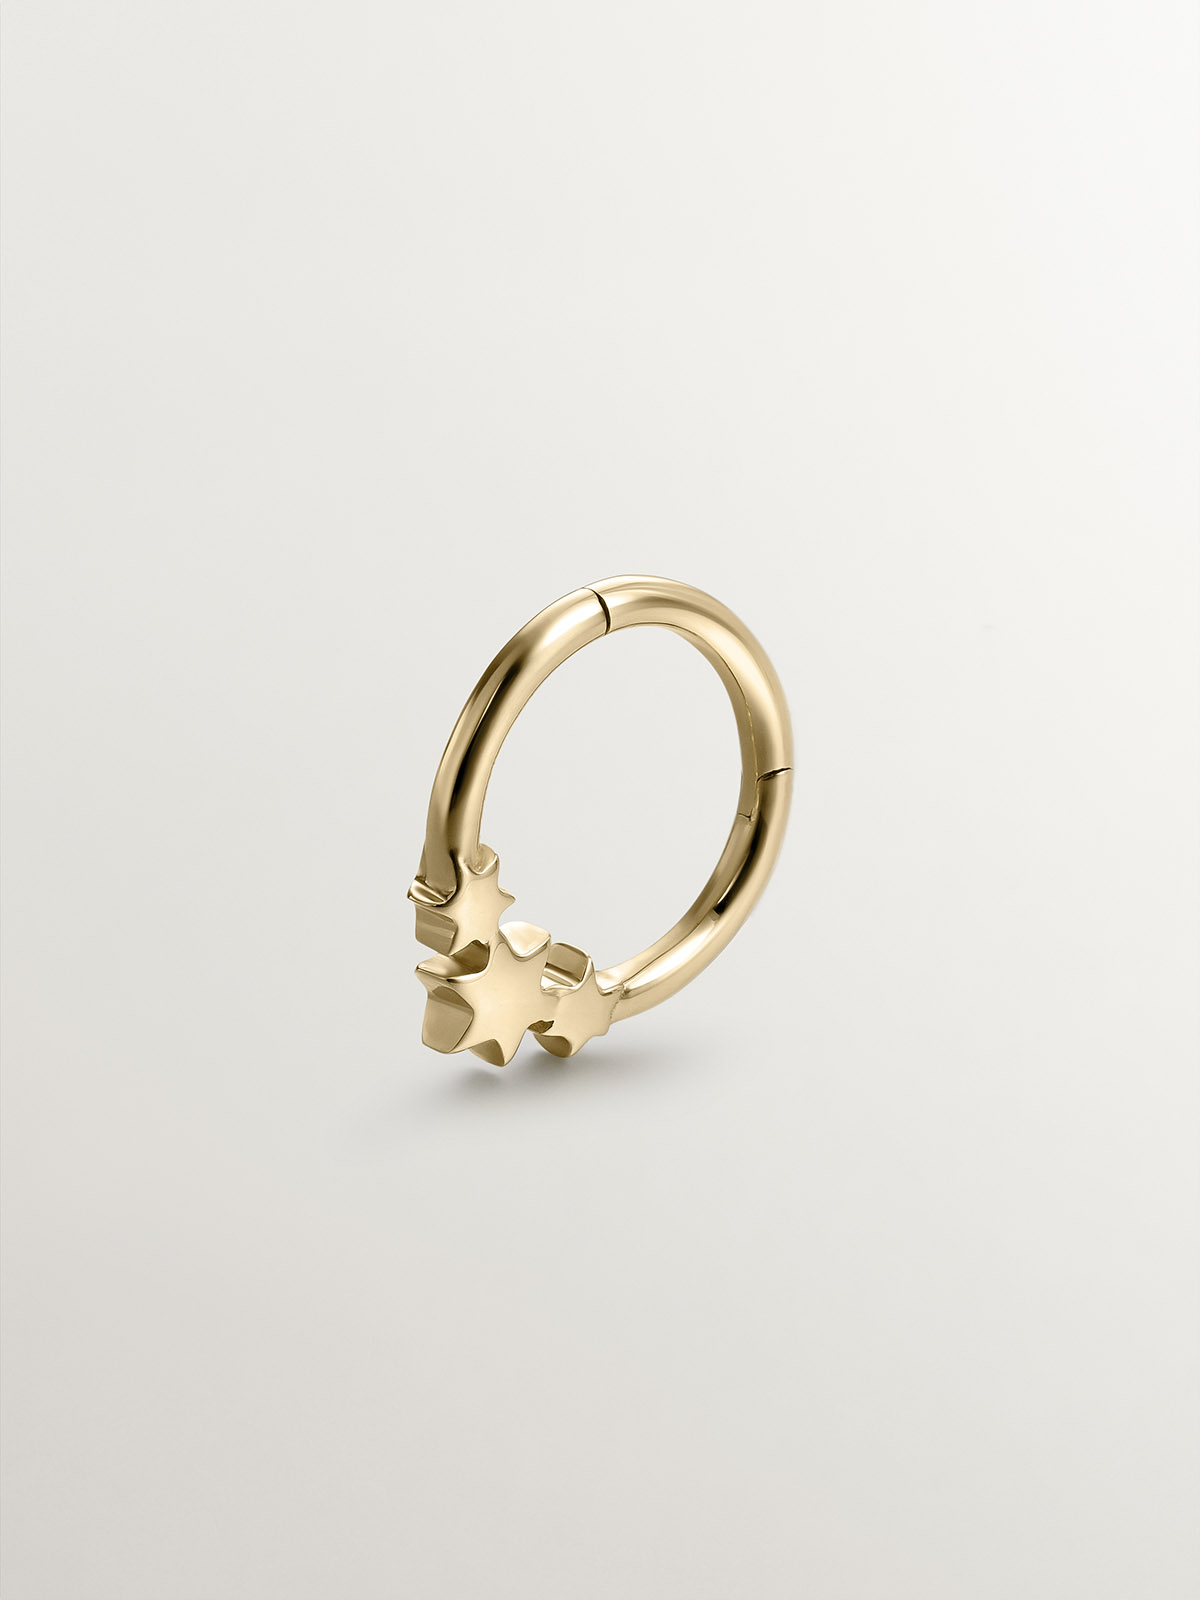 Small 9K yellow gold hoop earring with stars.